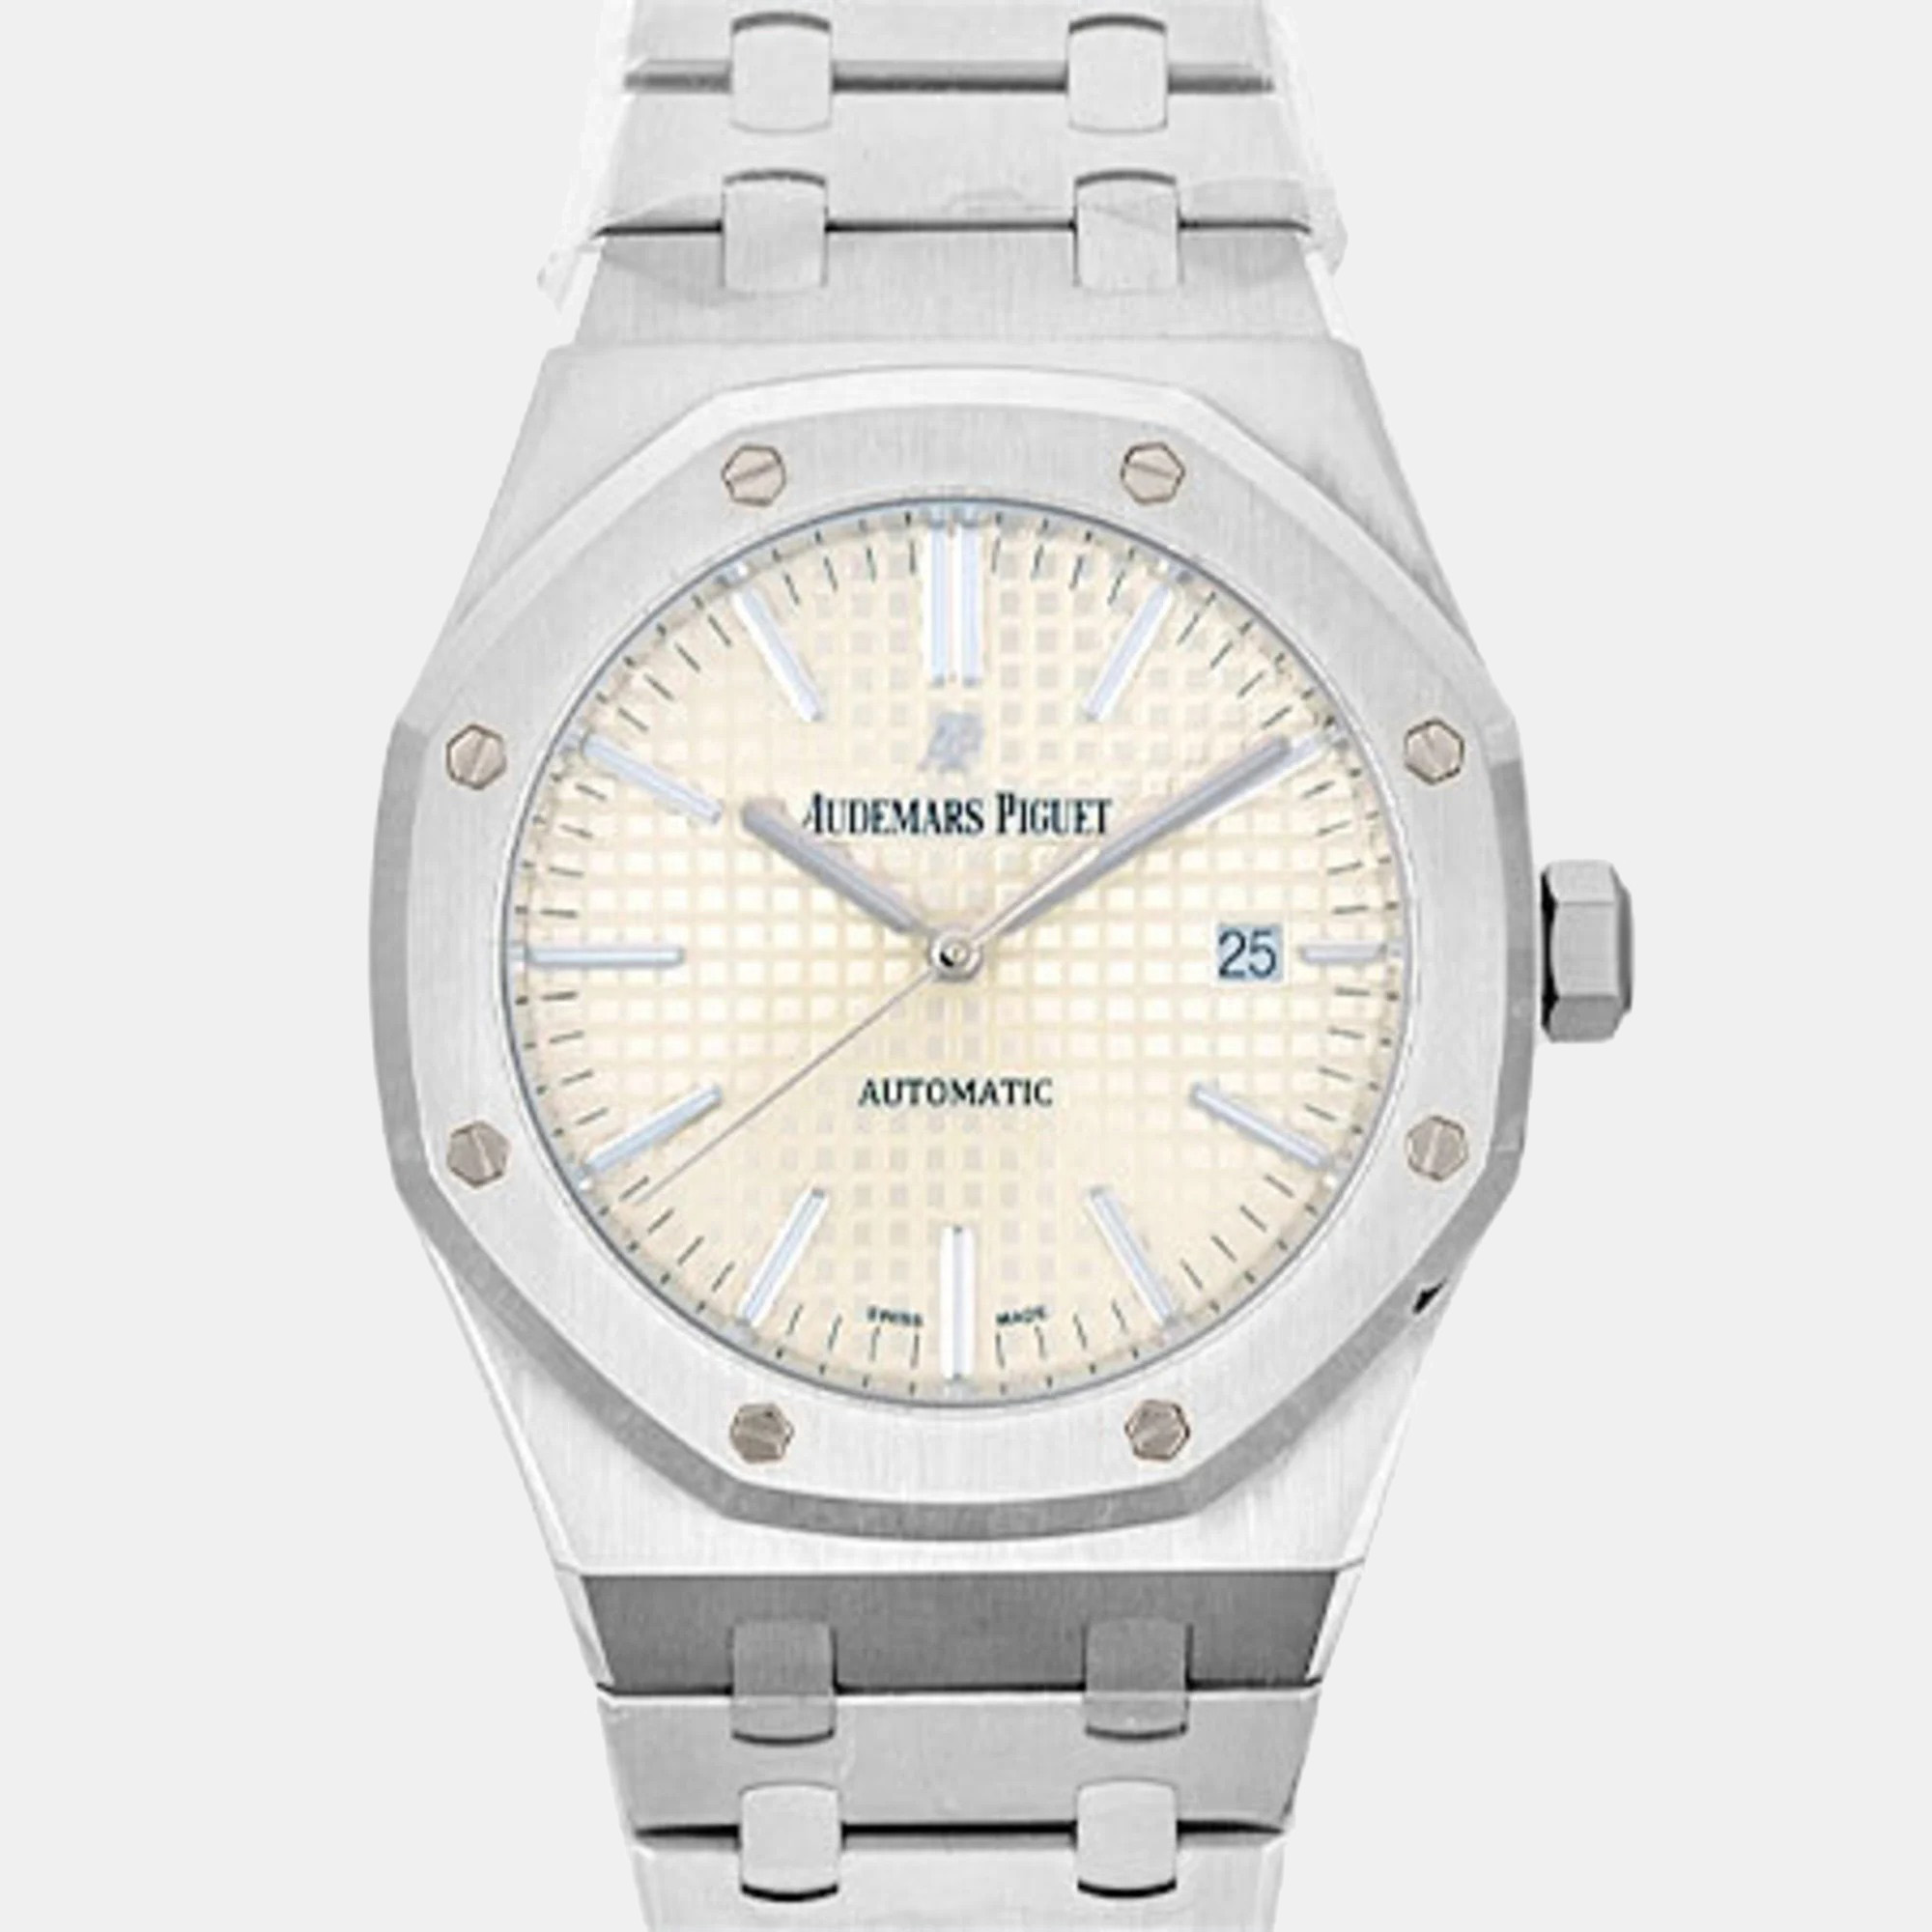 Sophisticated design and traditions of fine watchmaking characterize this authentic designer timepiece. Grace your wrist with this Audemars Piguet luxurious piece and instantly elevate your day.